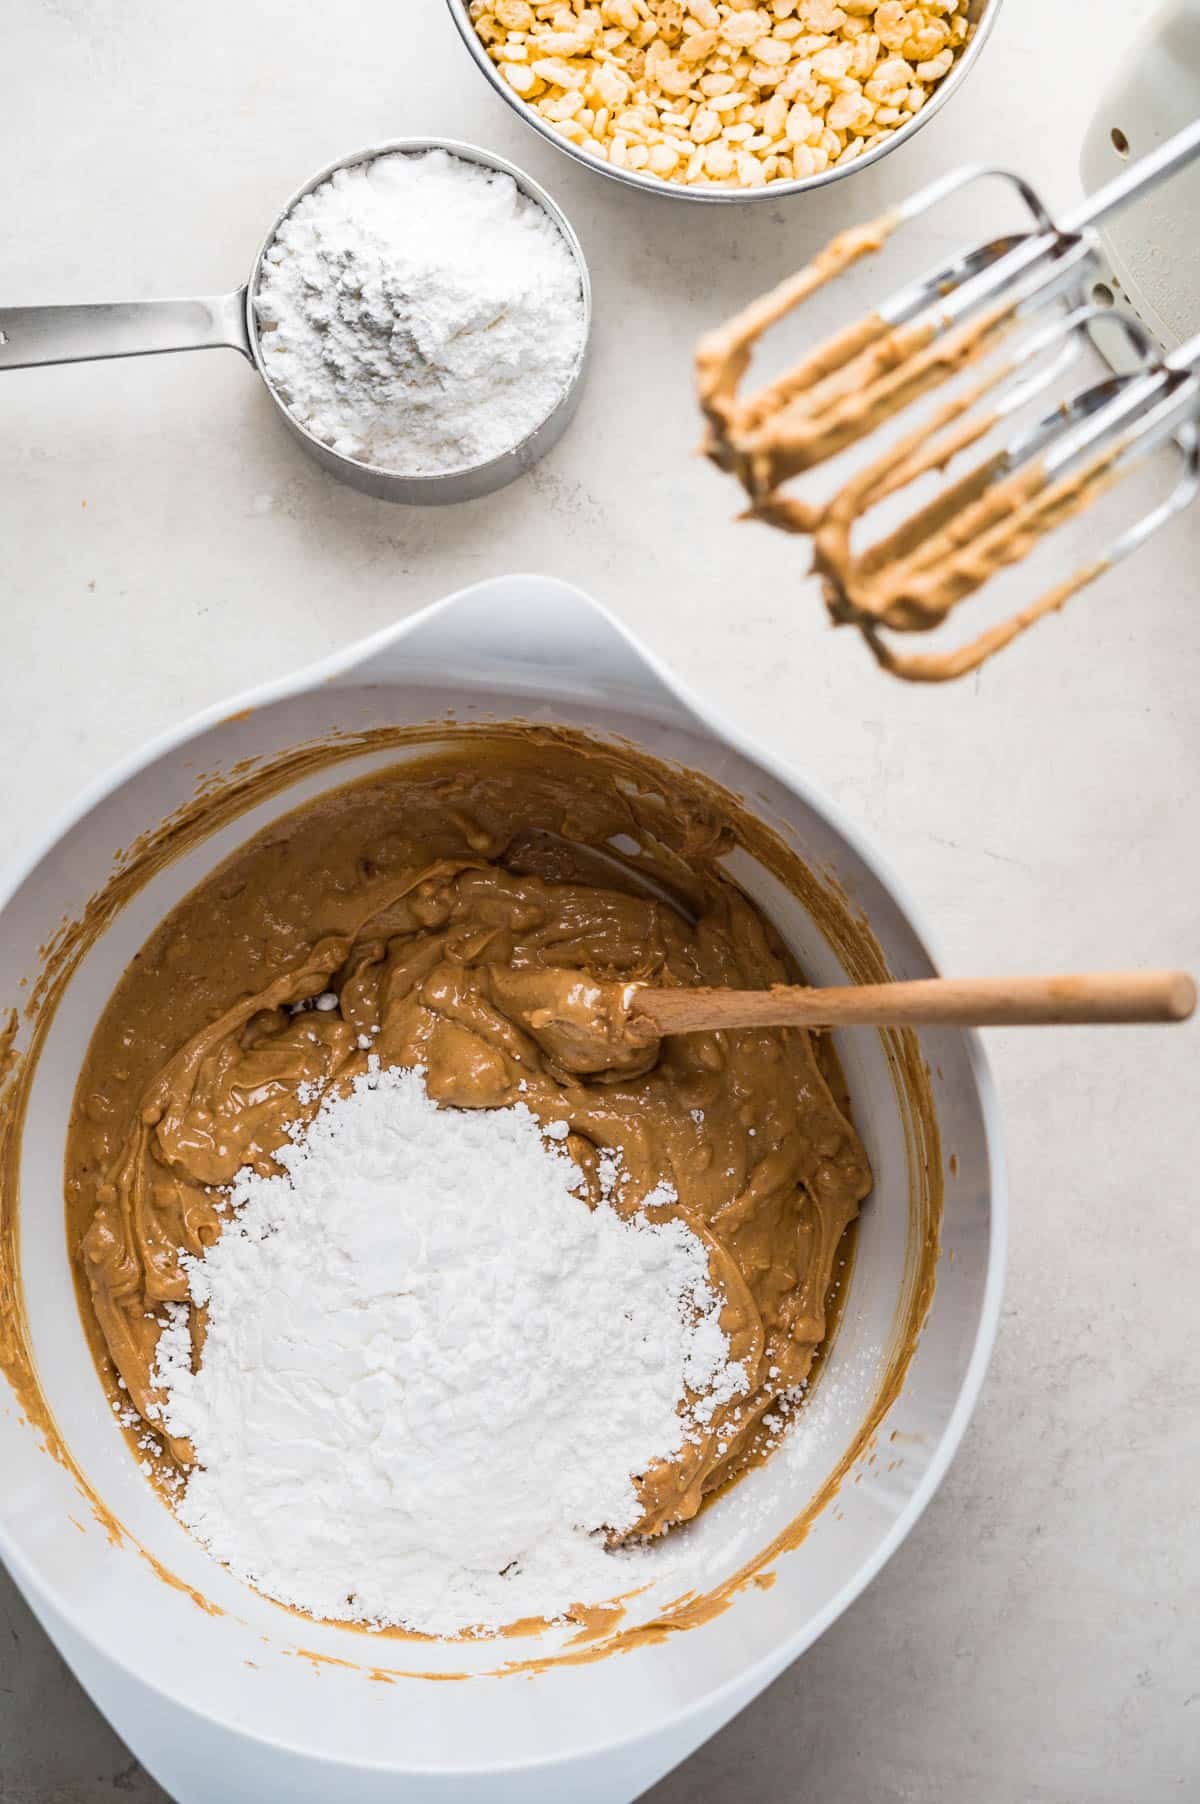 blending confectioner's sugar with the peanut butter mixture.